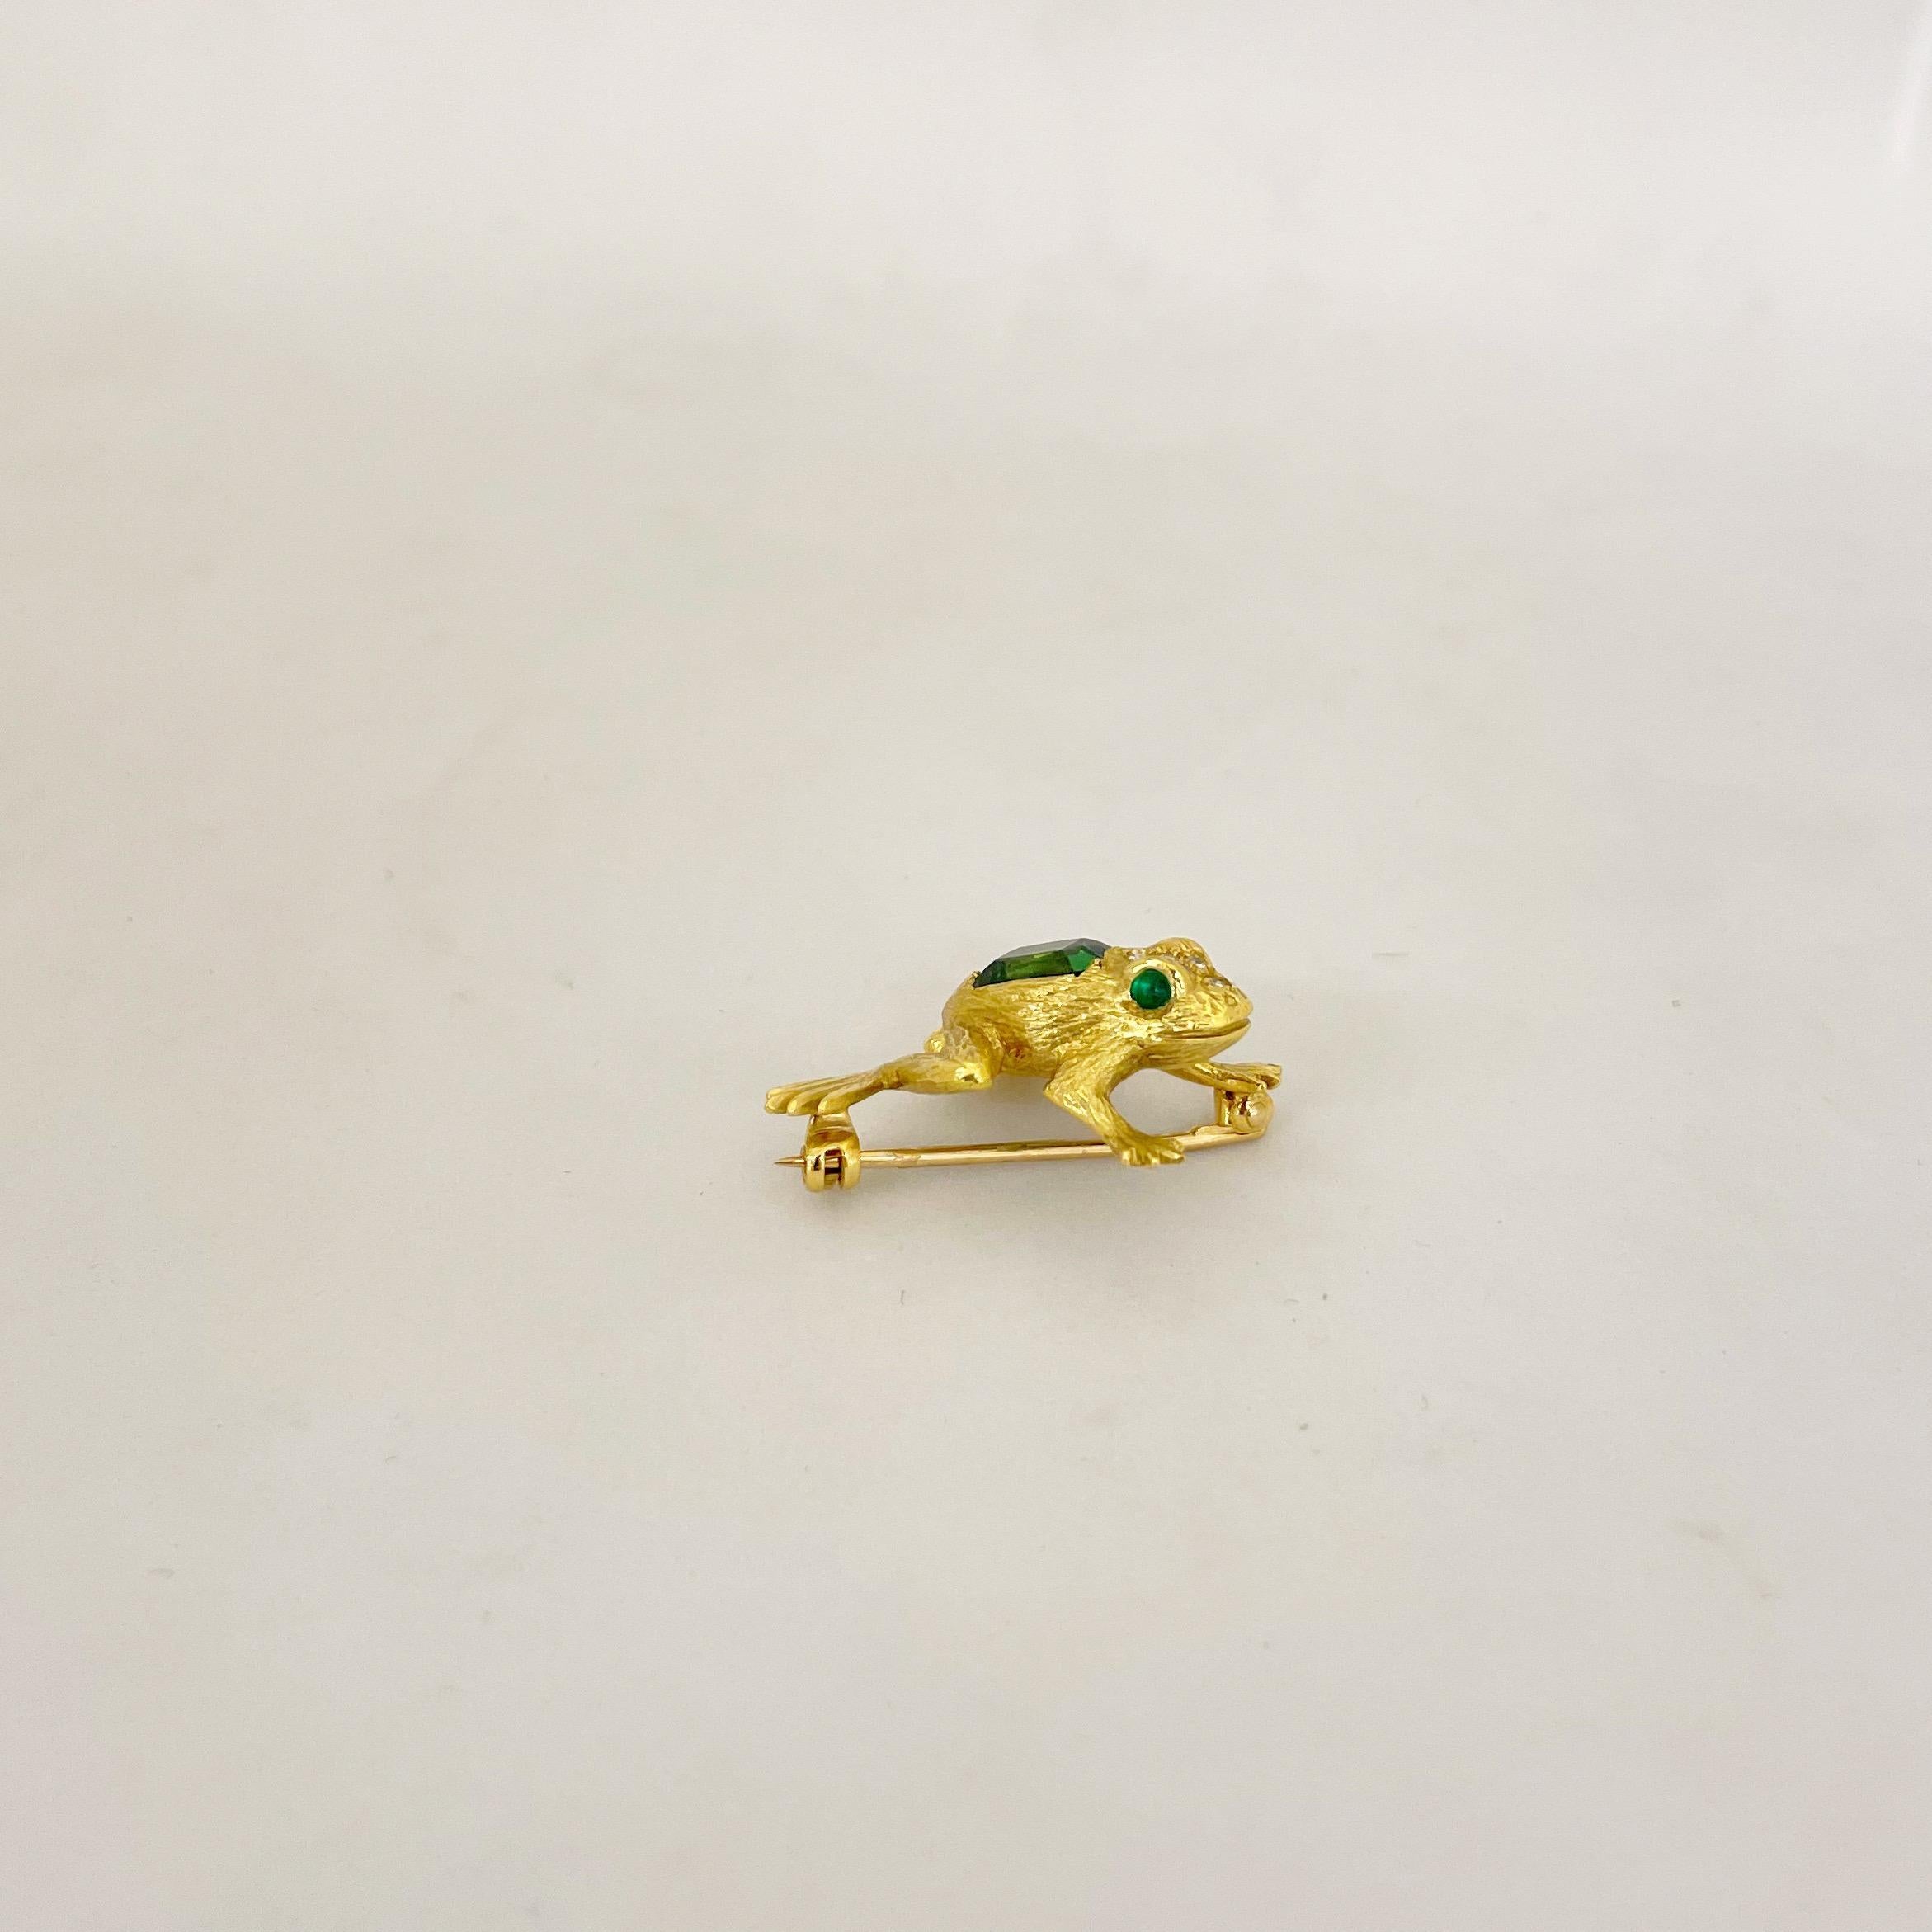 18KT Yellow Gold Frog Brooch with 1.86Ct. Green Tourmaline & 09.Ct. Diamonds 2